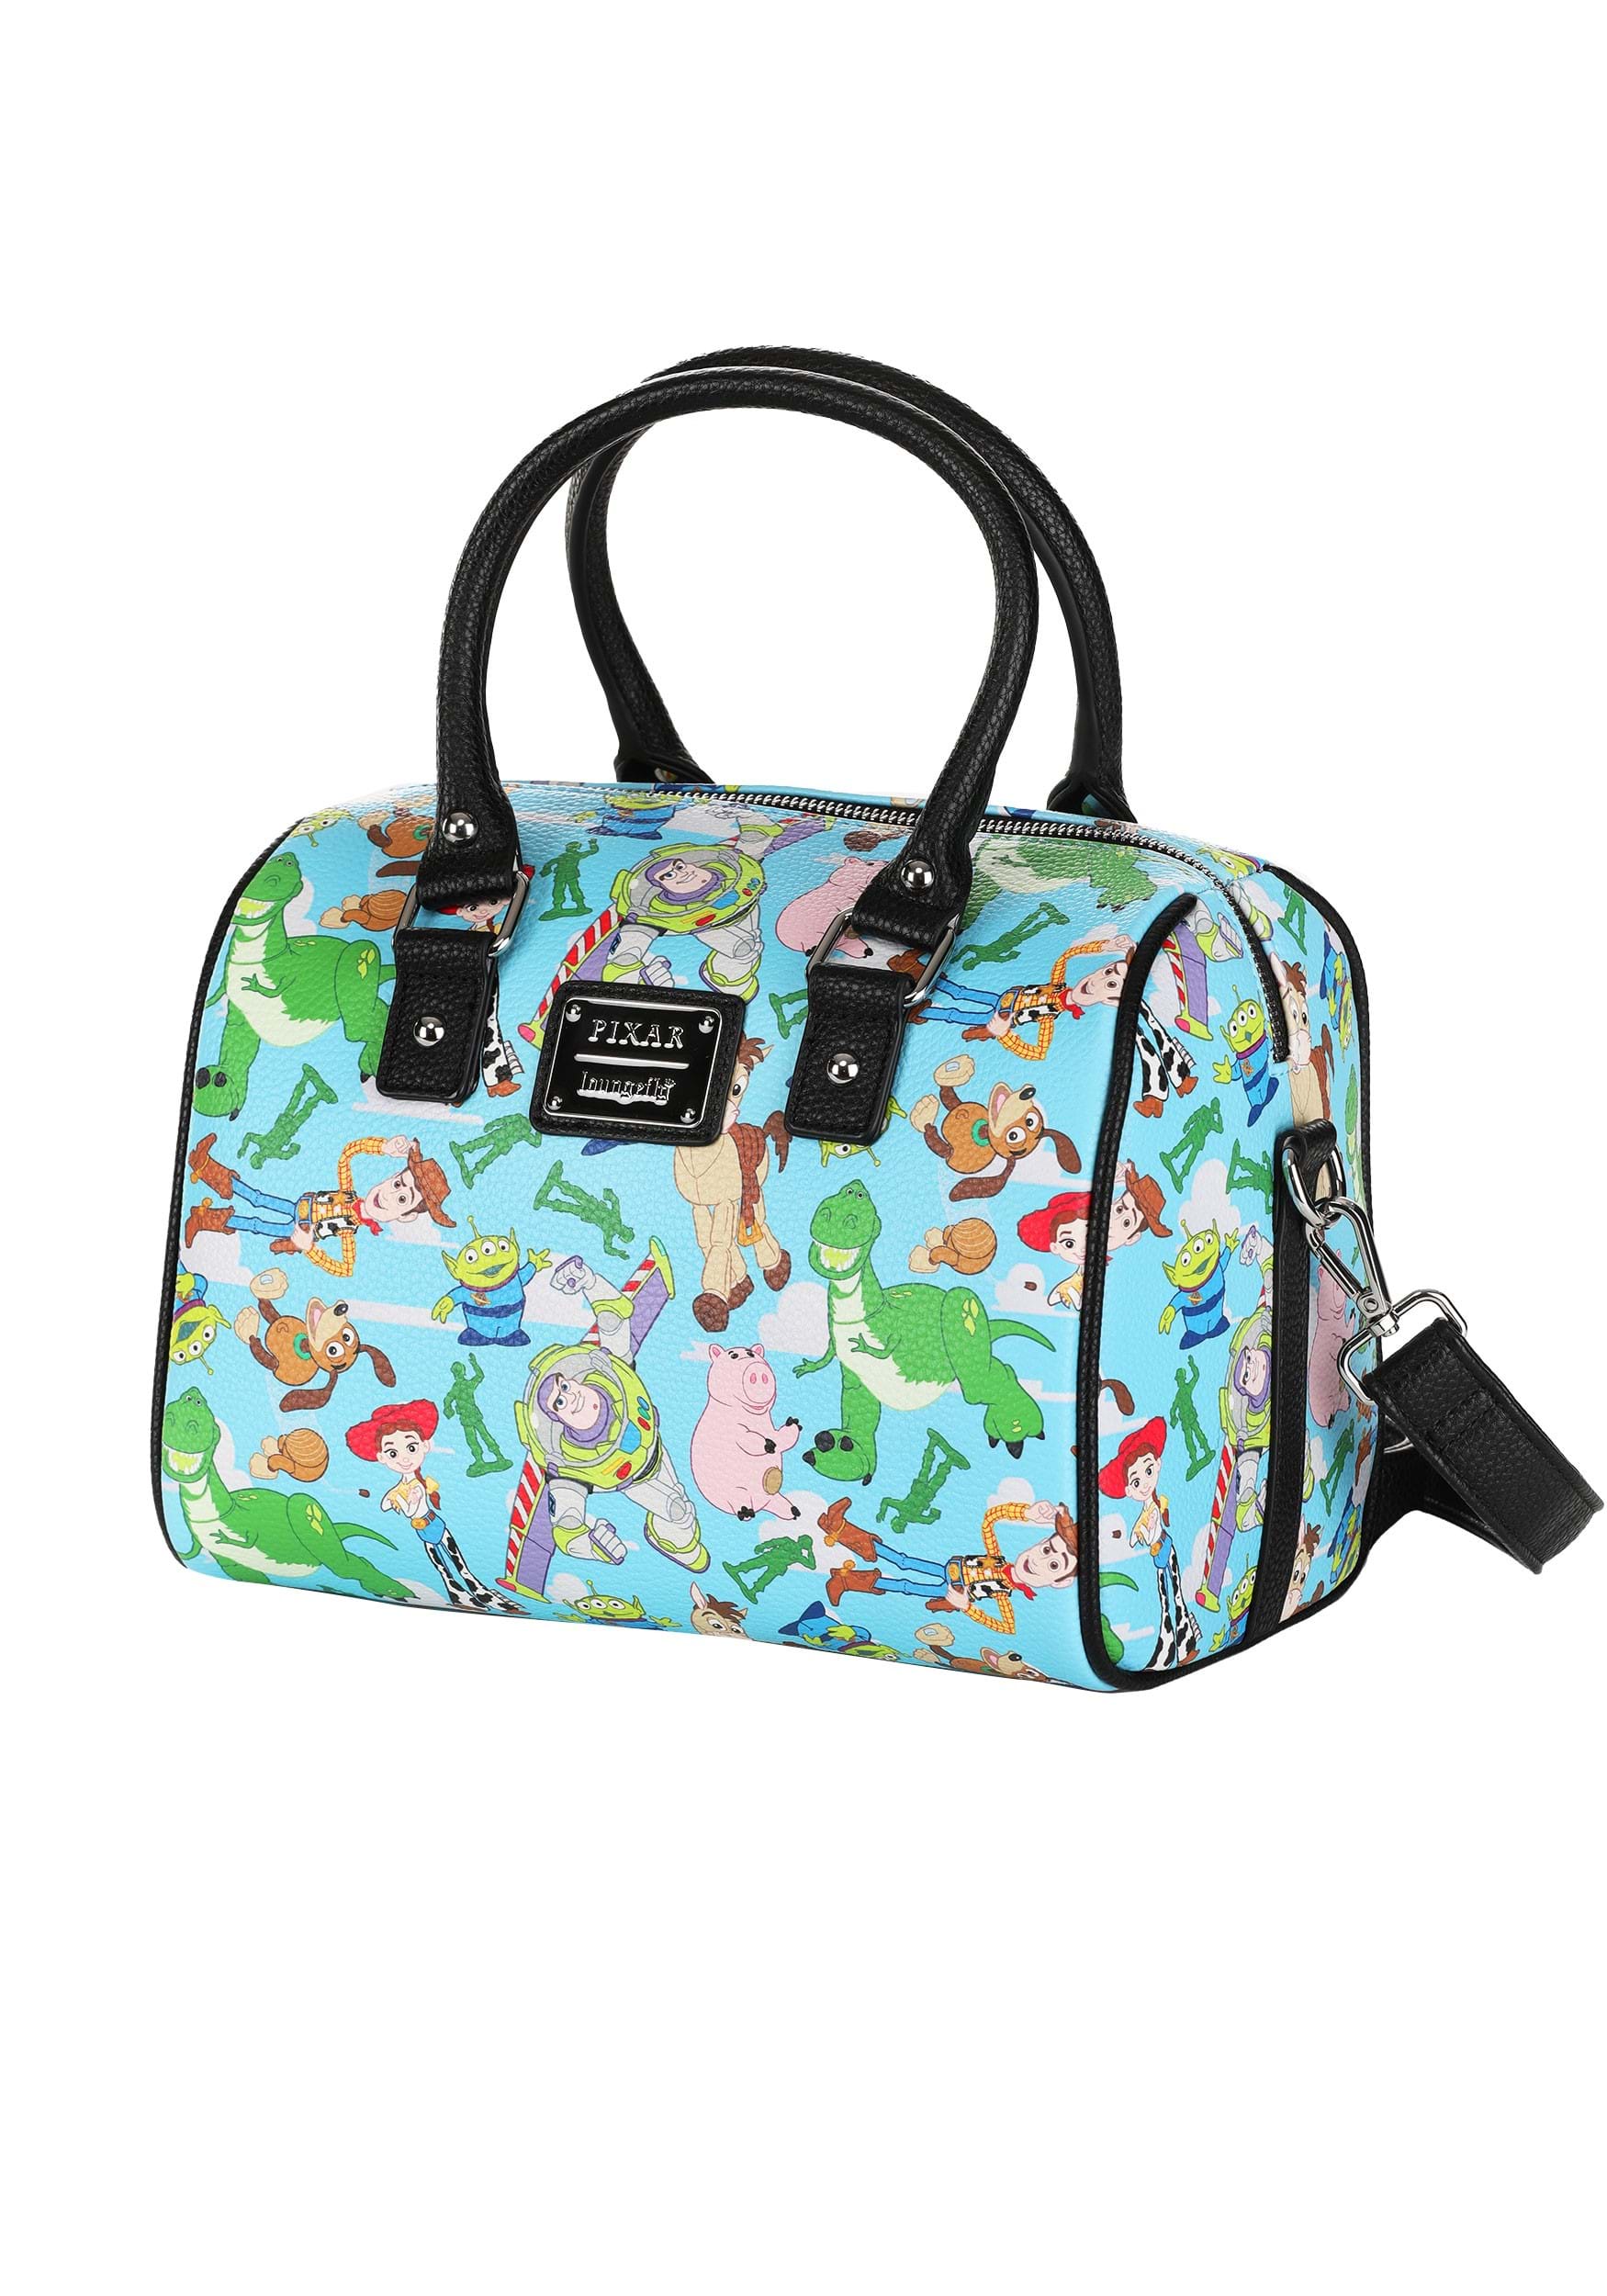 Loungefly Pixar Toy Story Purse